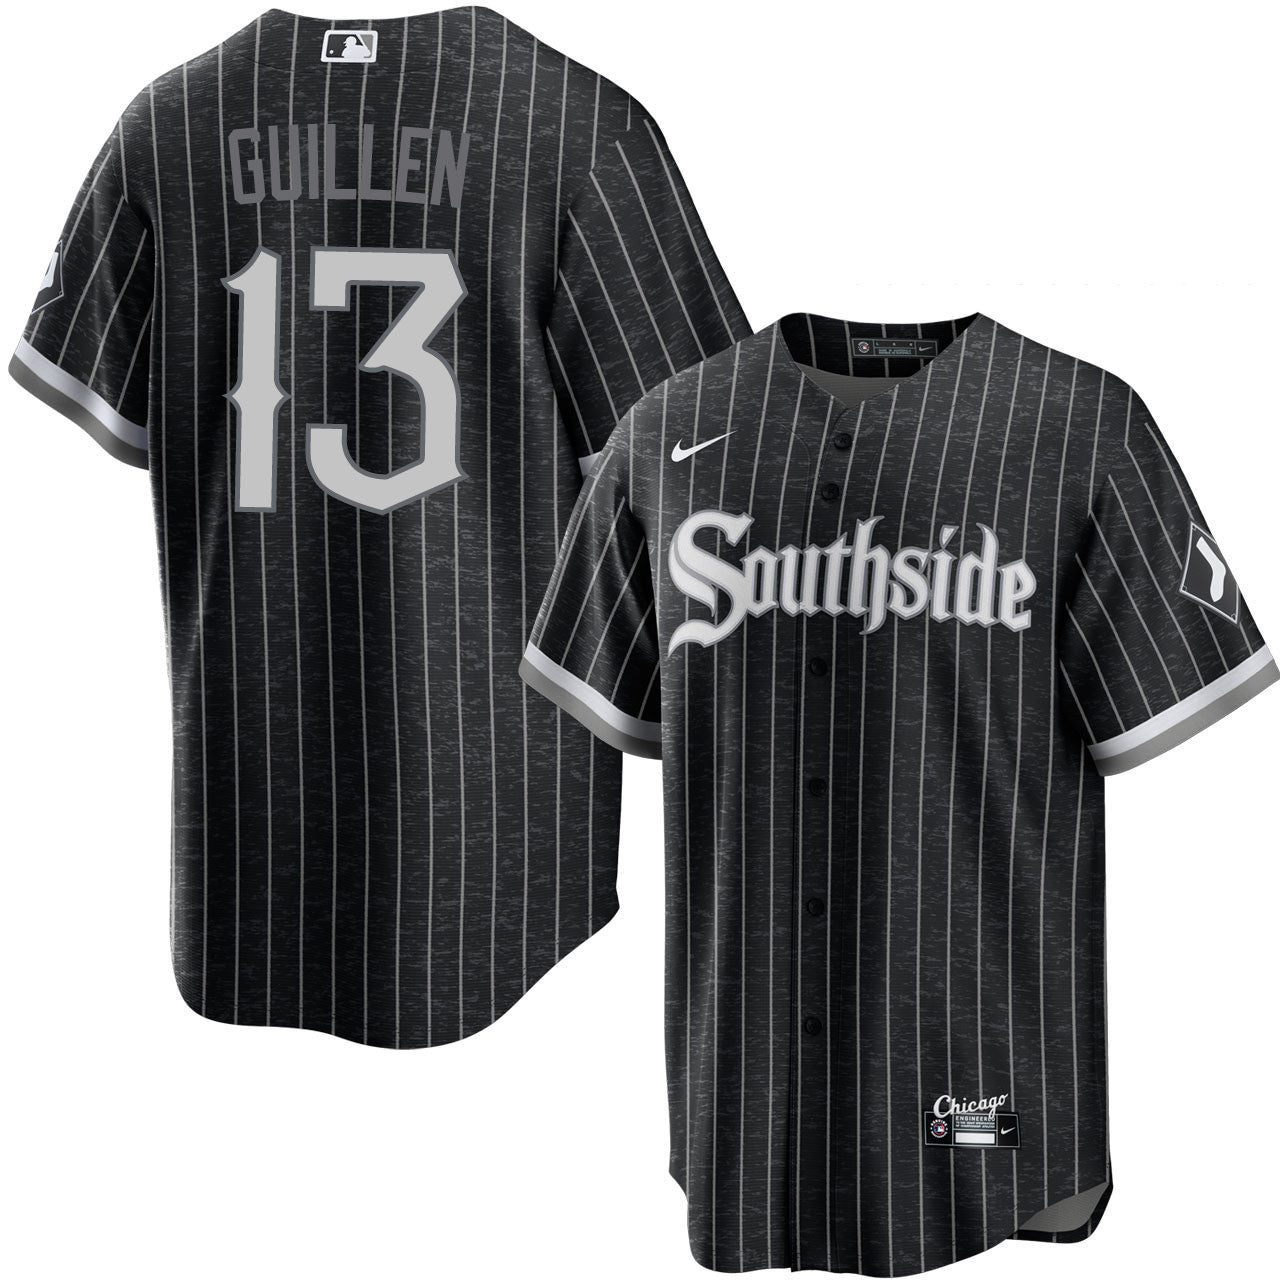 Youth Ozzie Guillen Chicago White Sox Replica White Cooperstown Collection  Jersey